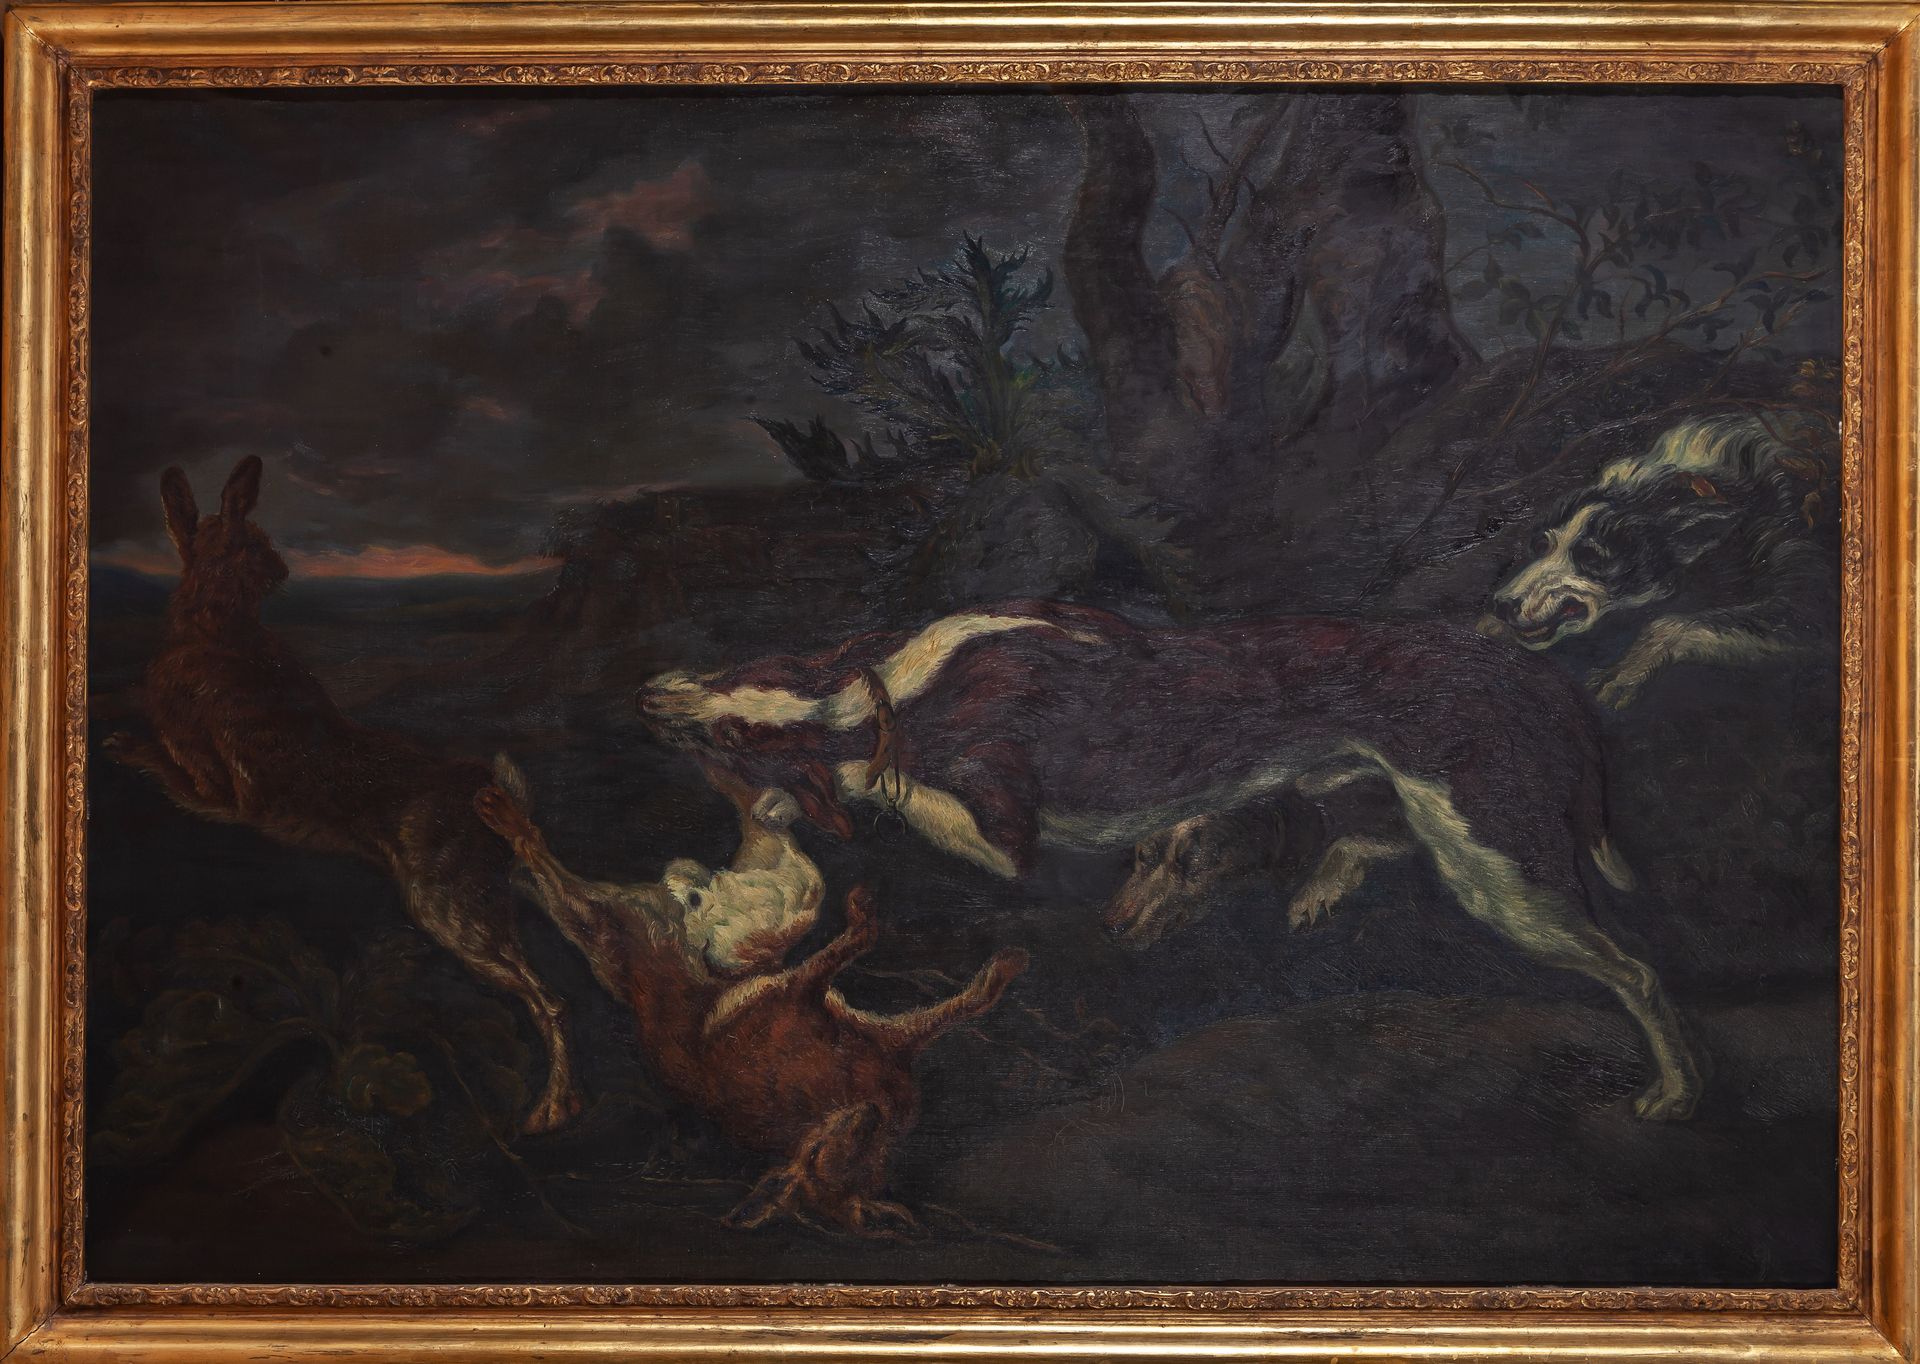 Copy of JAN FYT, c.1920 Copy by JAN FYT, c.1920
"Hares chased by dogs".
Oil on c&hellip;